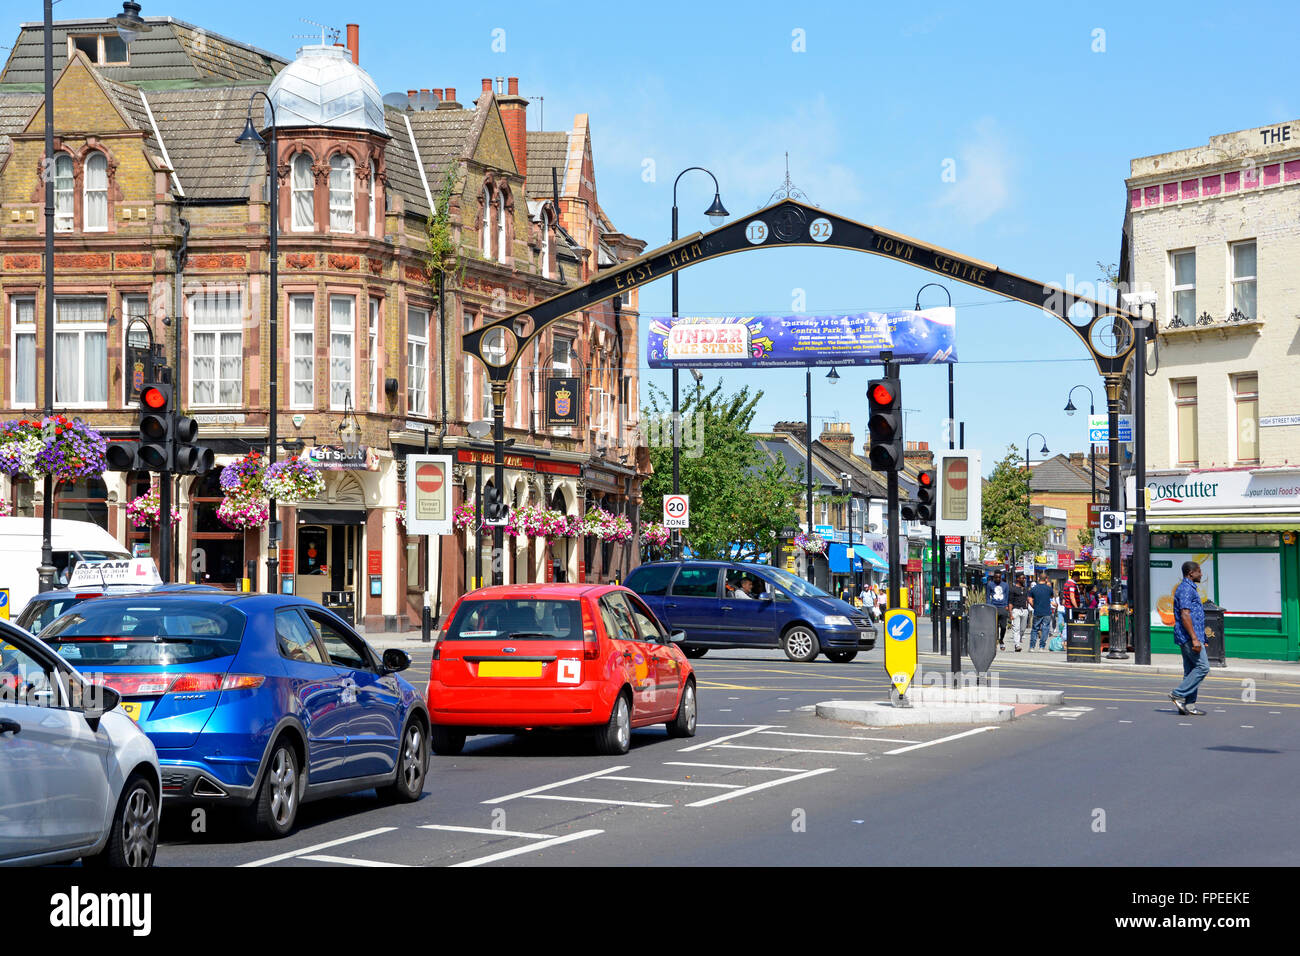 Multicultural East Ham London Borough of Newham street scene with cars at traffic lights on junction of High Street North and Barking Road England UK Stock Photo